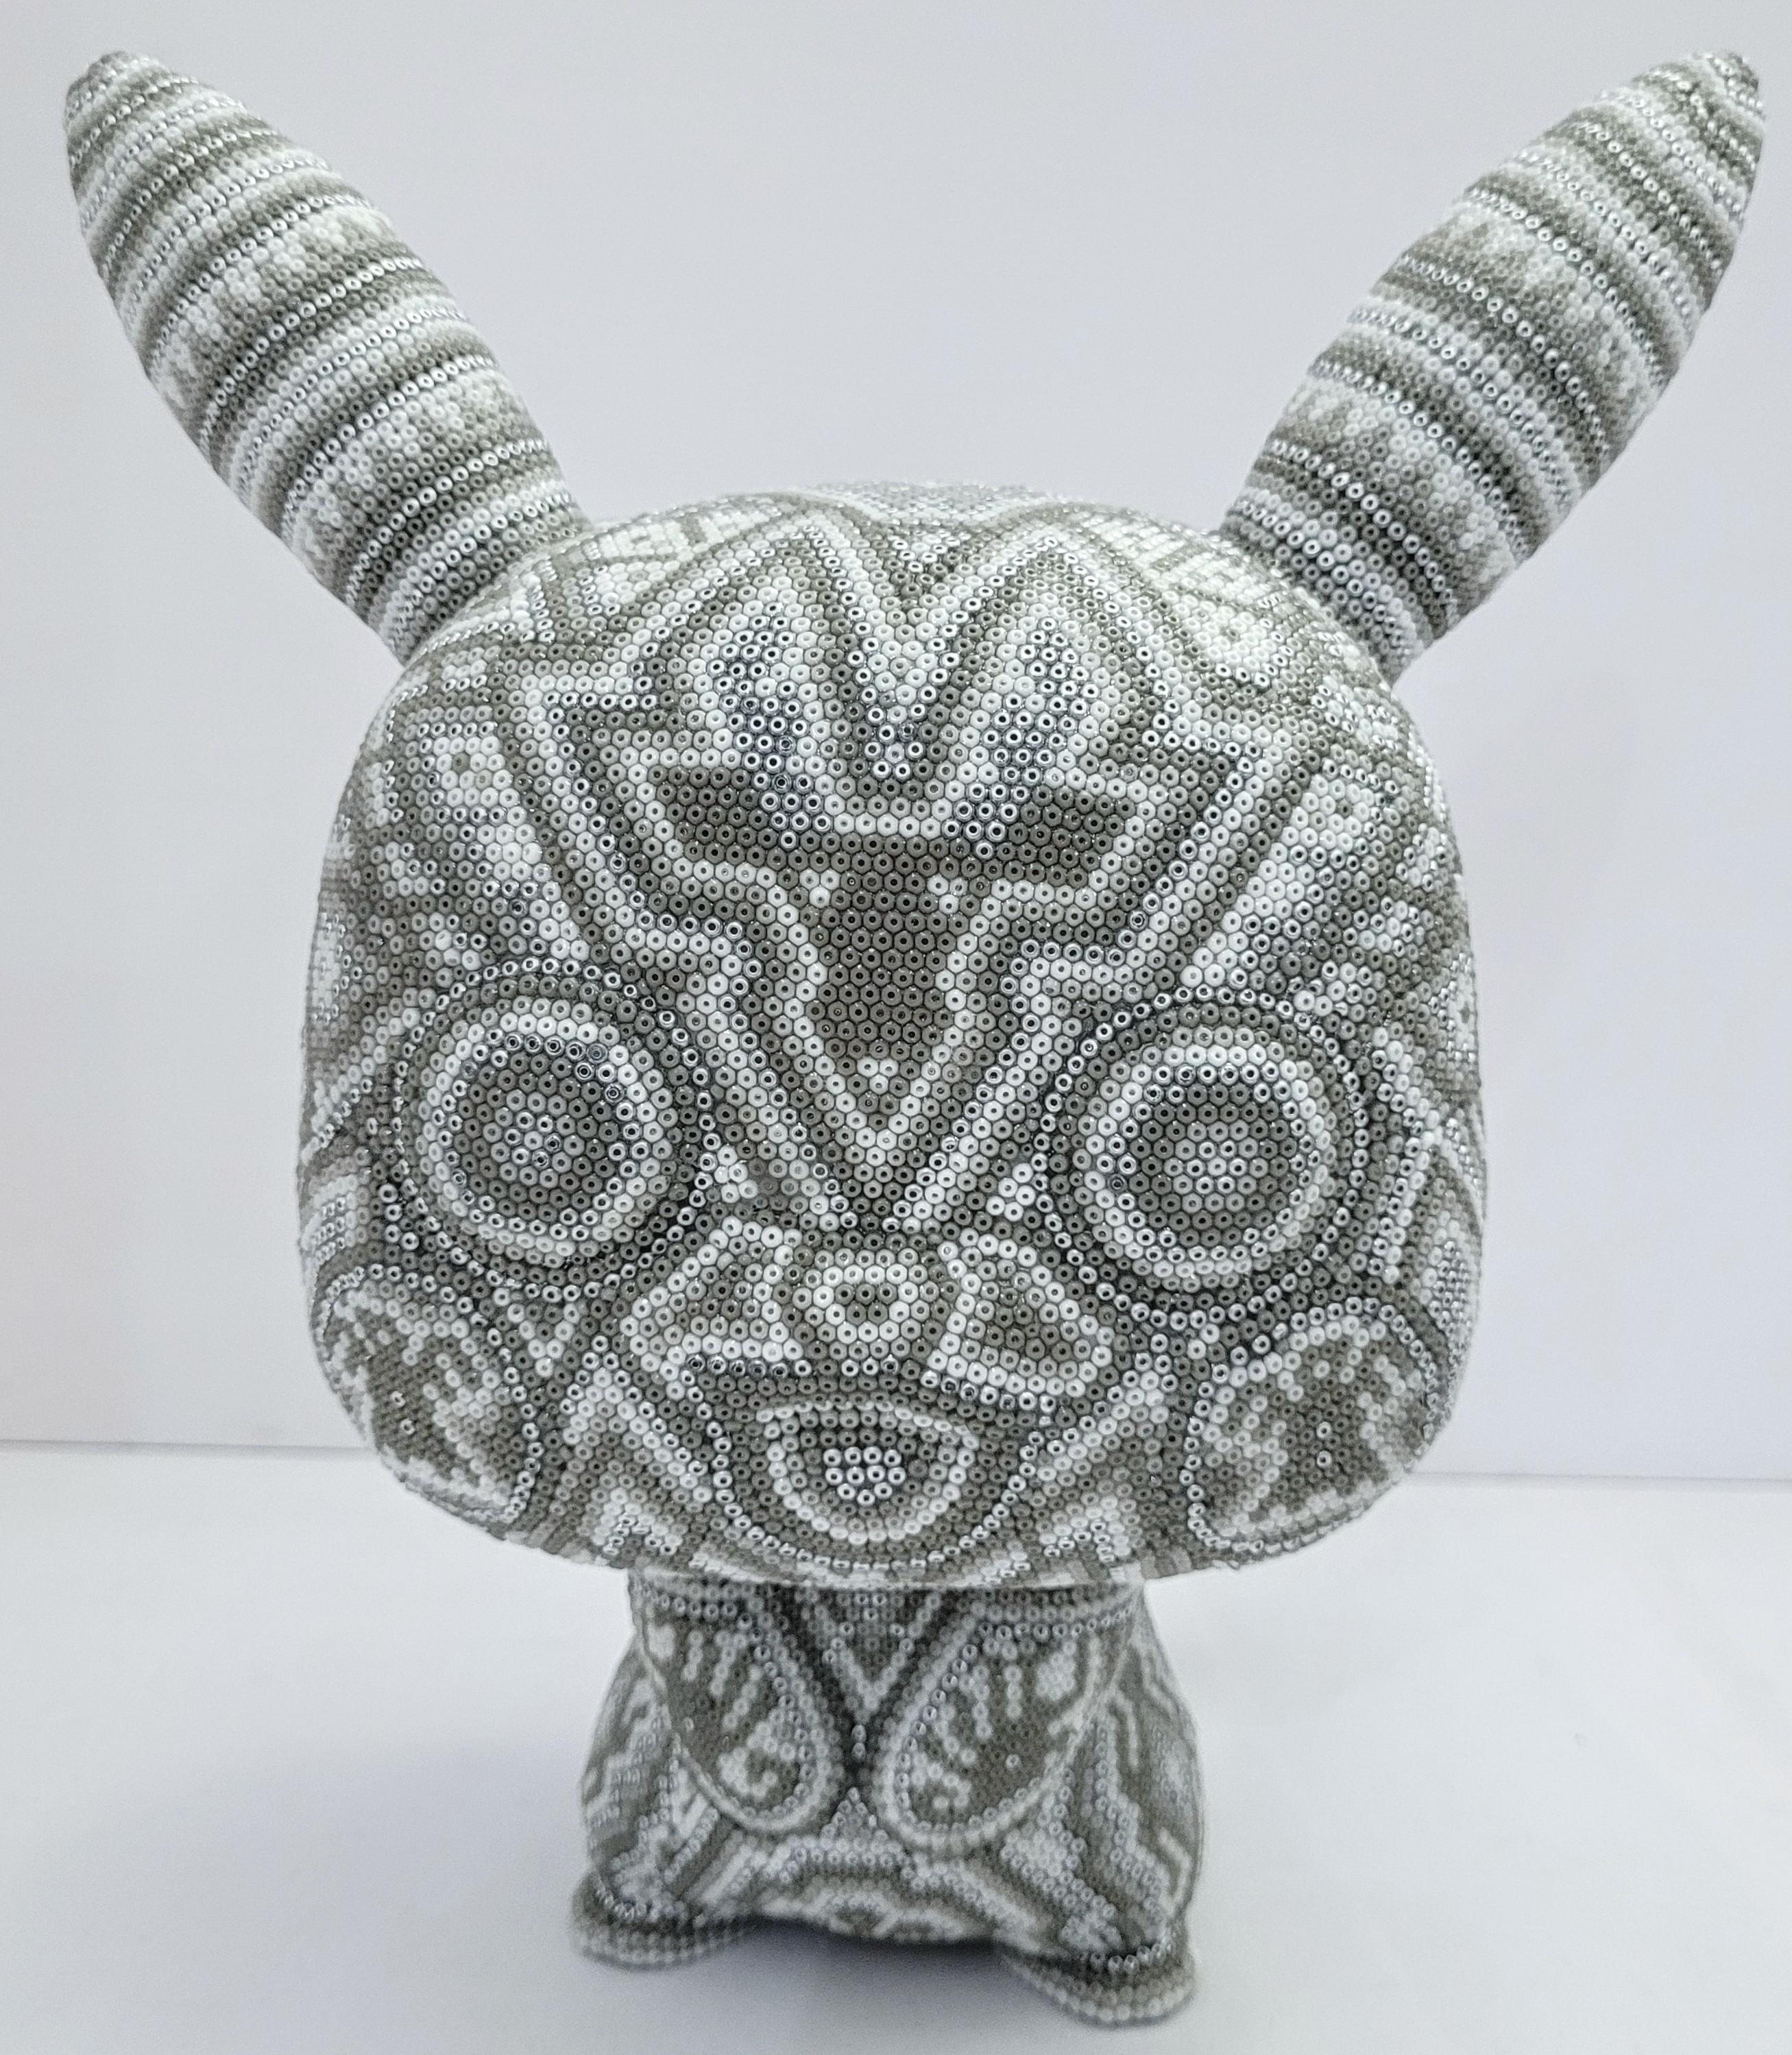 CHROMA aka Rick Wolfryd  Figurative Sculpture - "I'm All Ears" Silver from Huichol ALTERATIONS Series